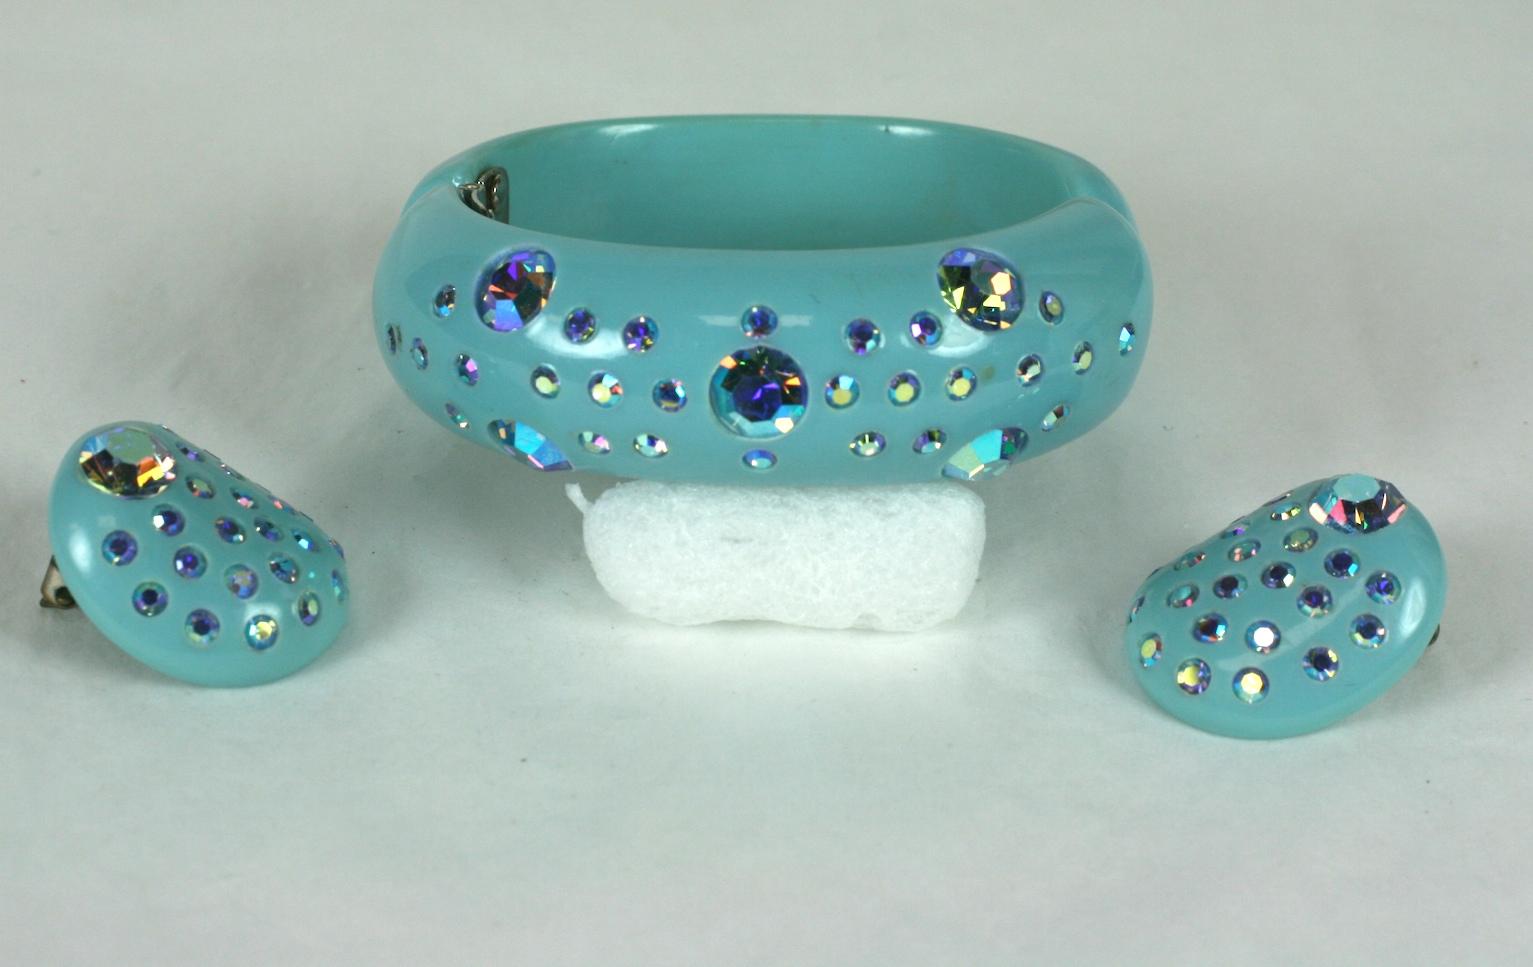 Kramer Bakelite Aurora Crystal Stone Suite with clamper bracelet and clip earrings. Pale blue plastic set with purplish Aurora crystal flashed stones. Festive sparkly suite from the 1950's USA.
Excellent condition.
Bracelet 1